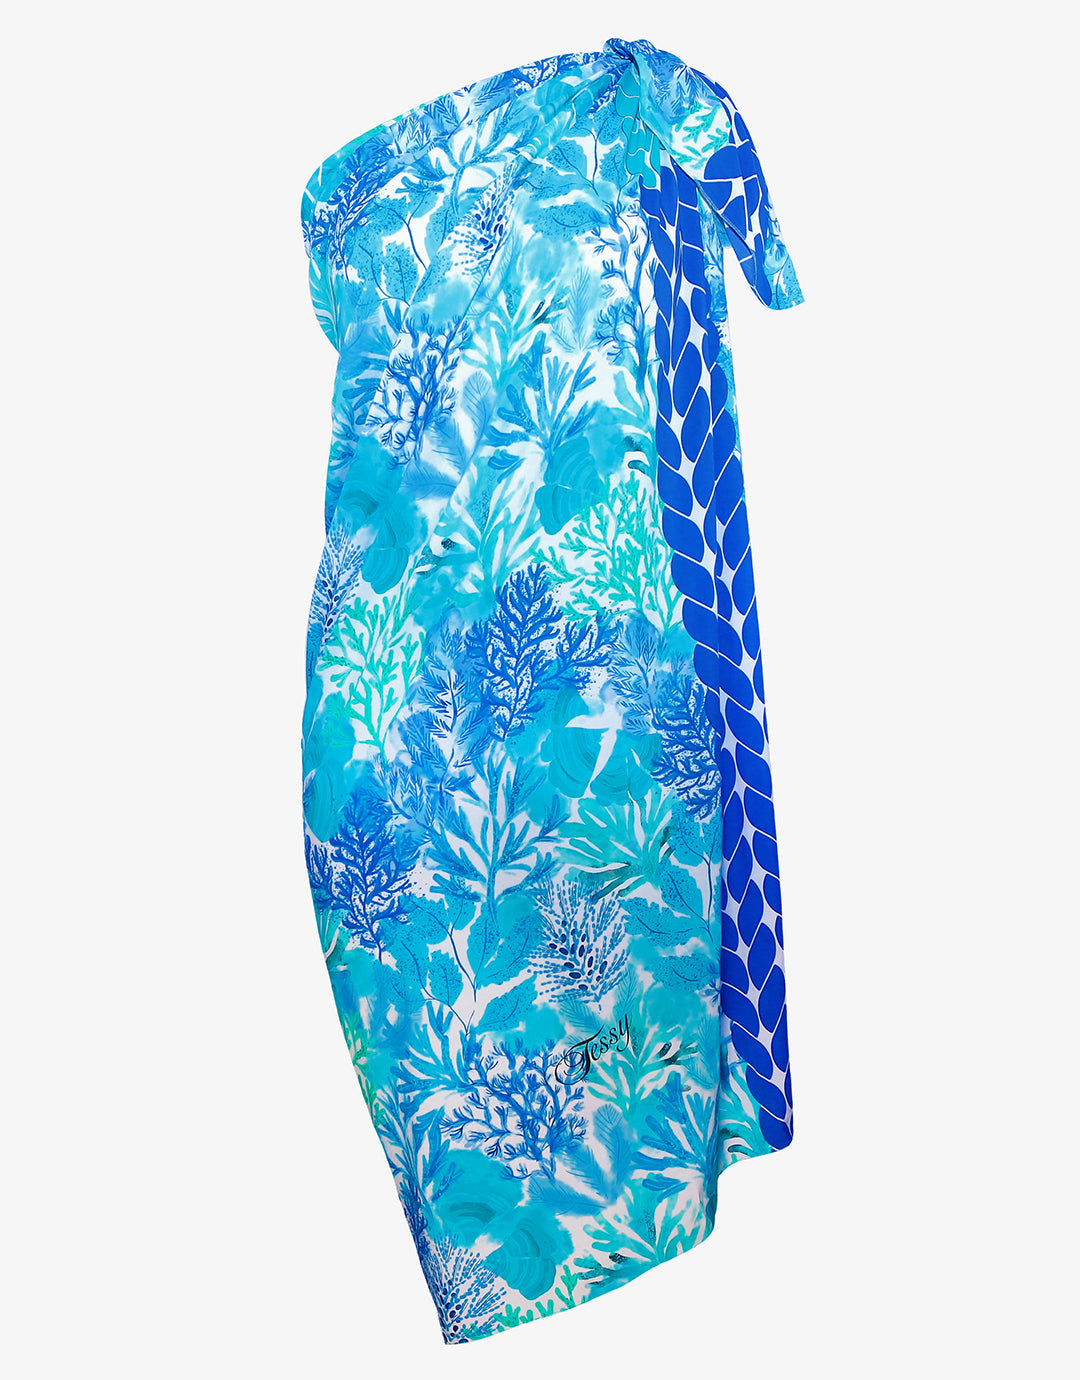 Coral Sarong - Turquoise - Simply Beach UK